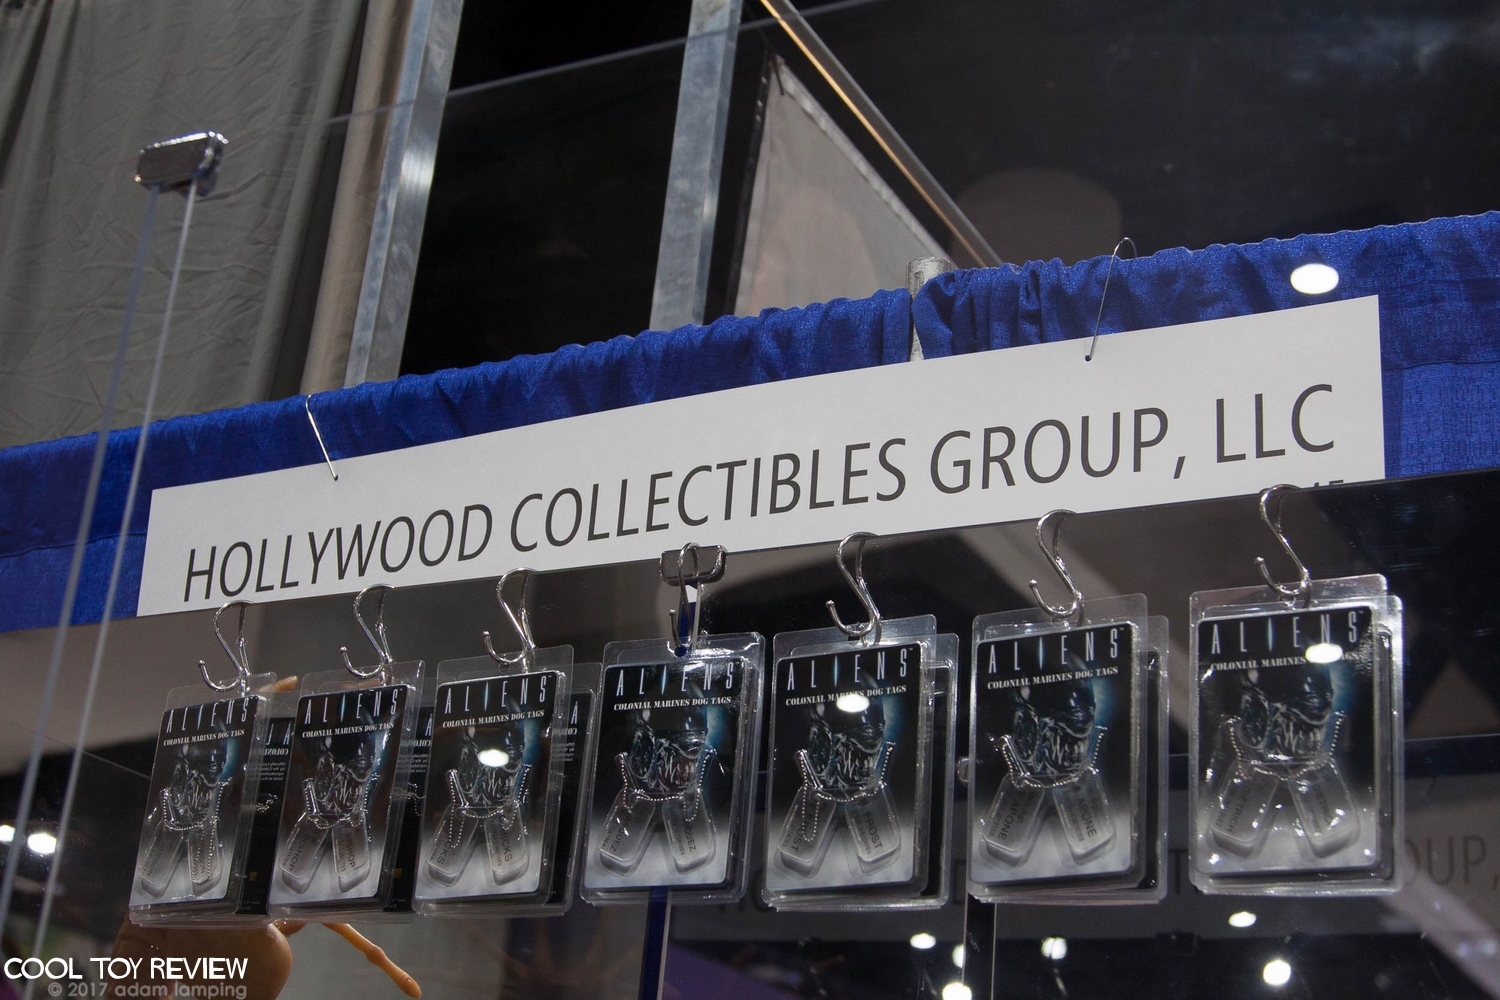 san-diego-comic-con-2017-hollywood-collectibles-group-001.jpg